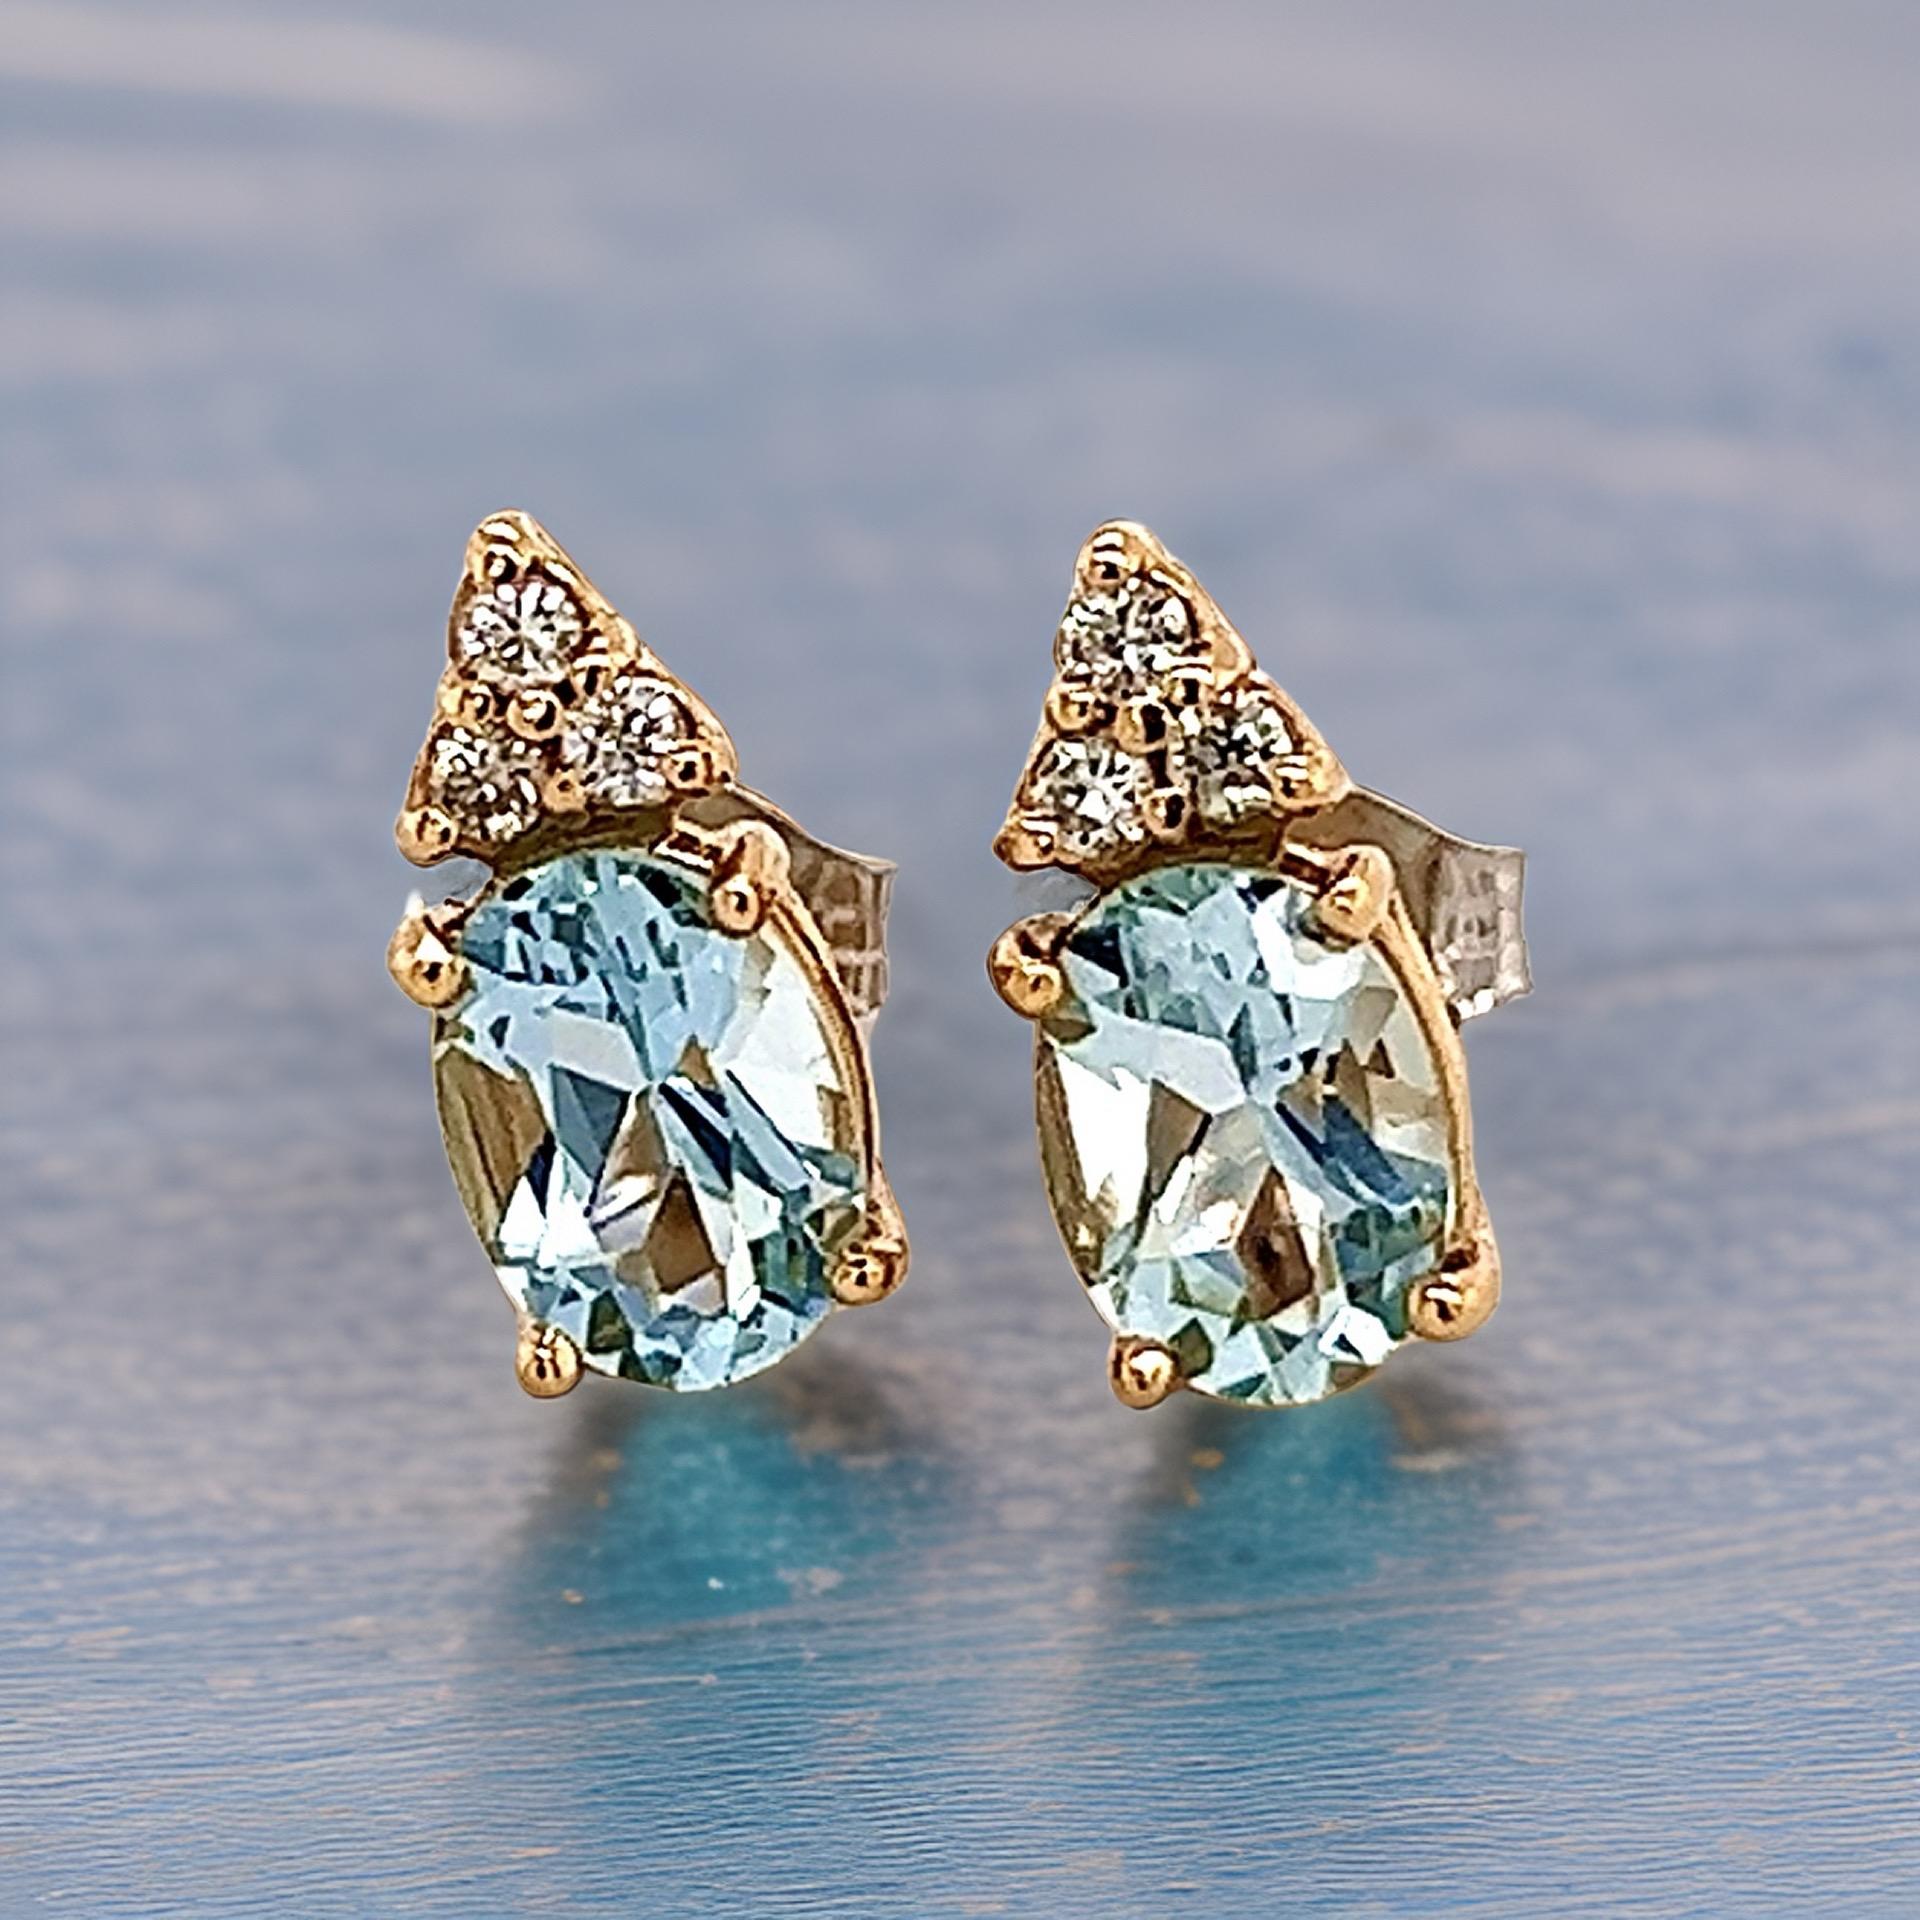 Oval Cut Natural Aquamarine Diamond Earrings 14k Y Gold 1.85 TCW Certified For Sale